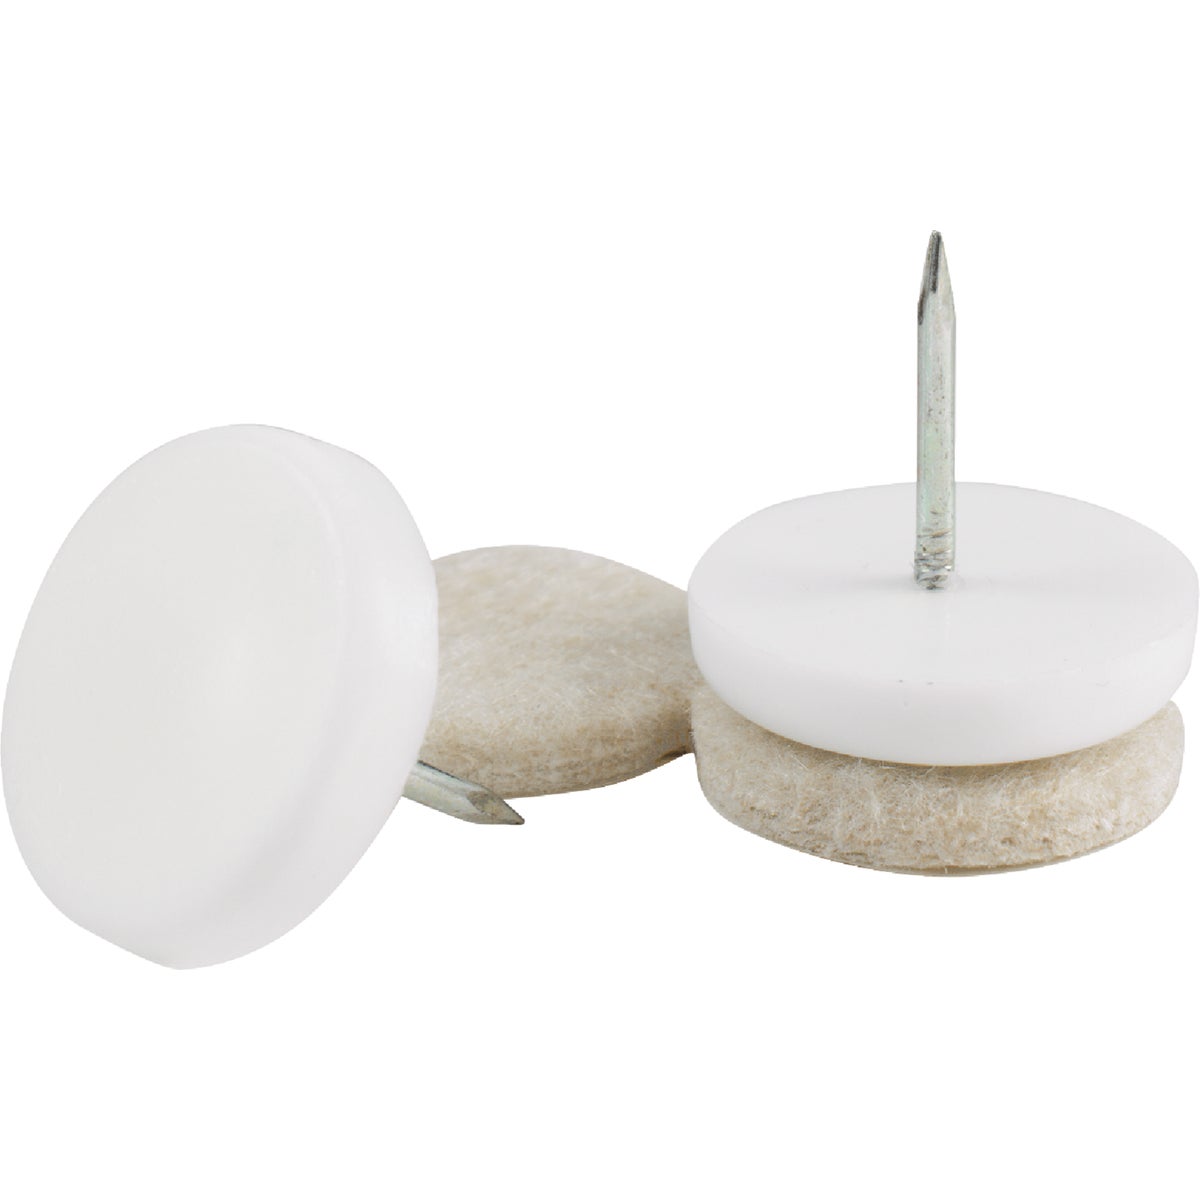 Item 227784, Do it nail-on furniture glides are designed for use on wooden furniture 